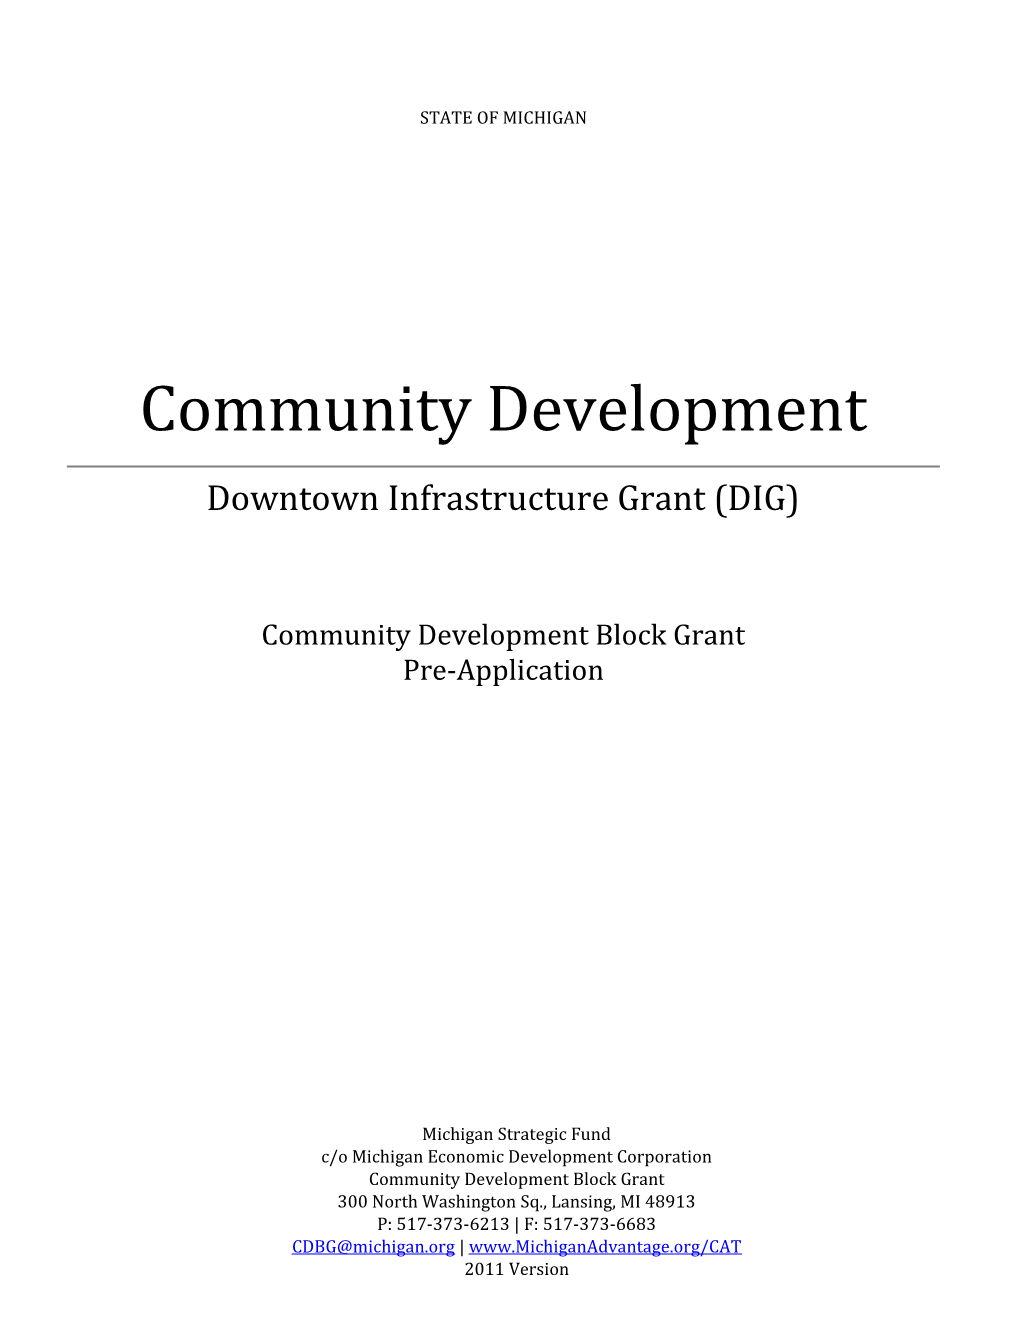 Downtown Infrastructure Grant (DIG) Pre-Application